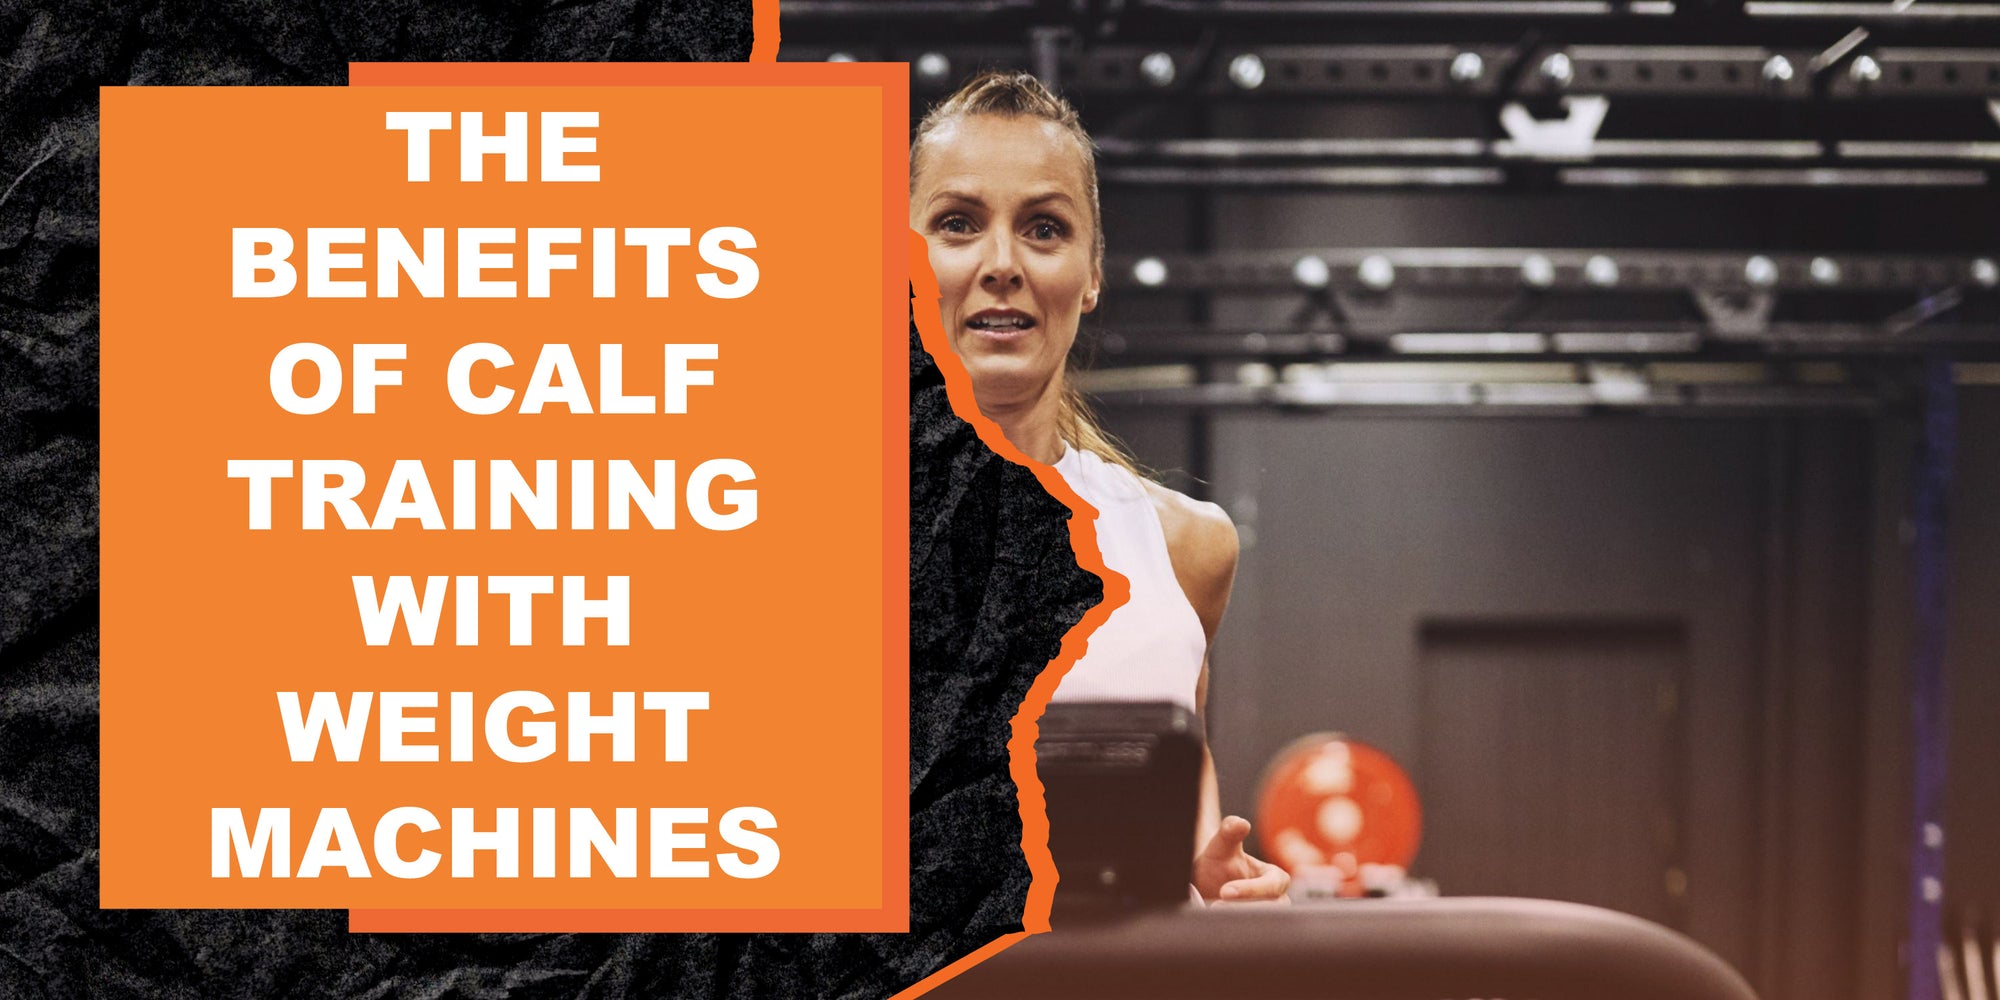 The Benefits of Calf Training with Weight Machines